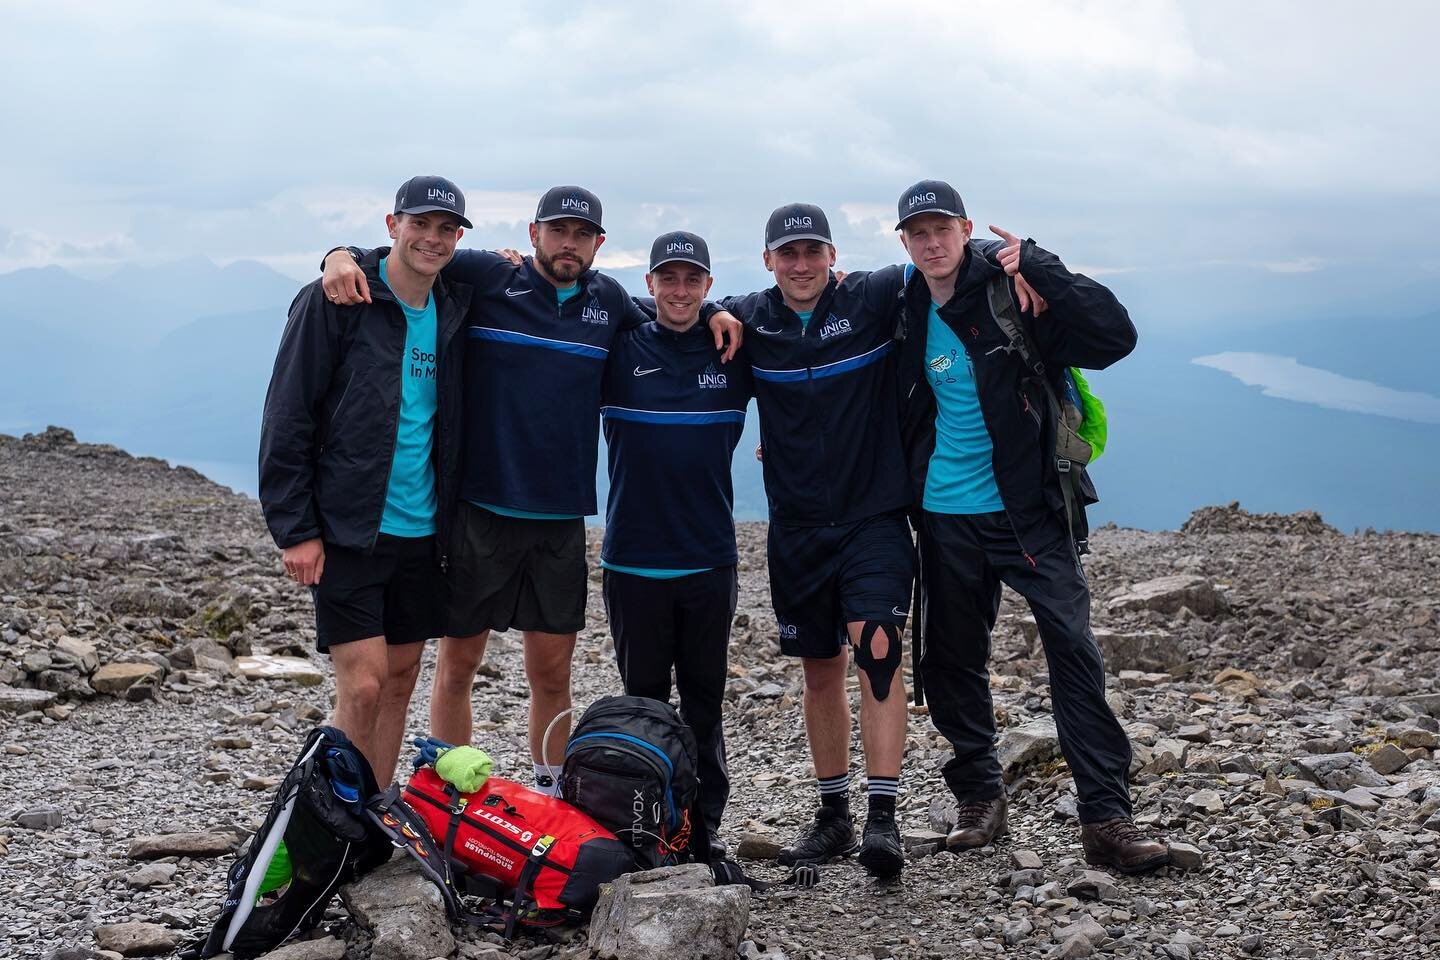 🏔National 3 Peaks Challenge&hellip;.. Completed for @sportinmind 🏔

Total Time - 22 hours 40 minutes 👊🏼

We are buzzing to have completed the 3 peaks challenge in under 24 hours! Our UNIQ coaching team consisting of Ash, Dan, Marco, Rob and Sam a